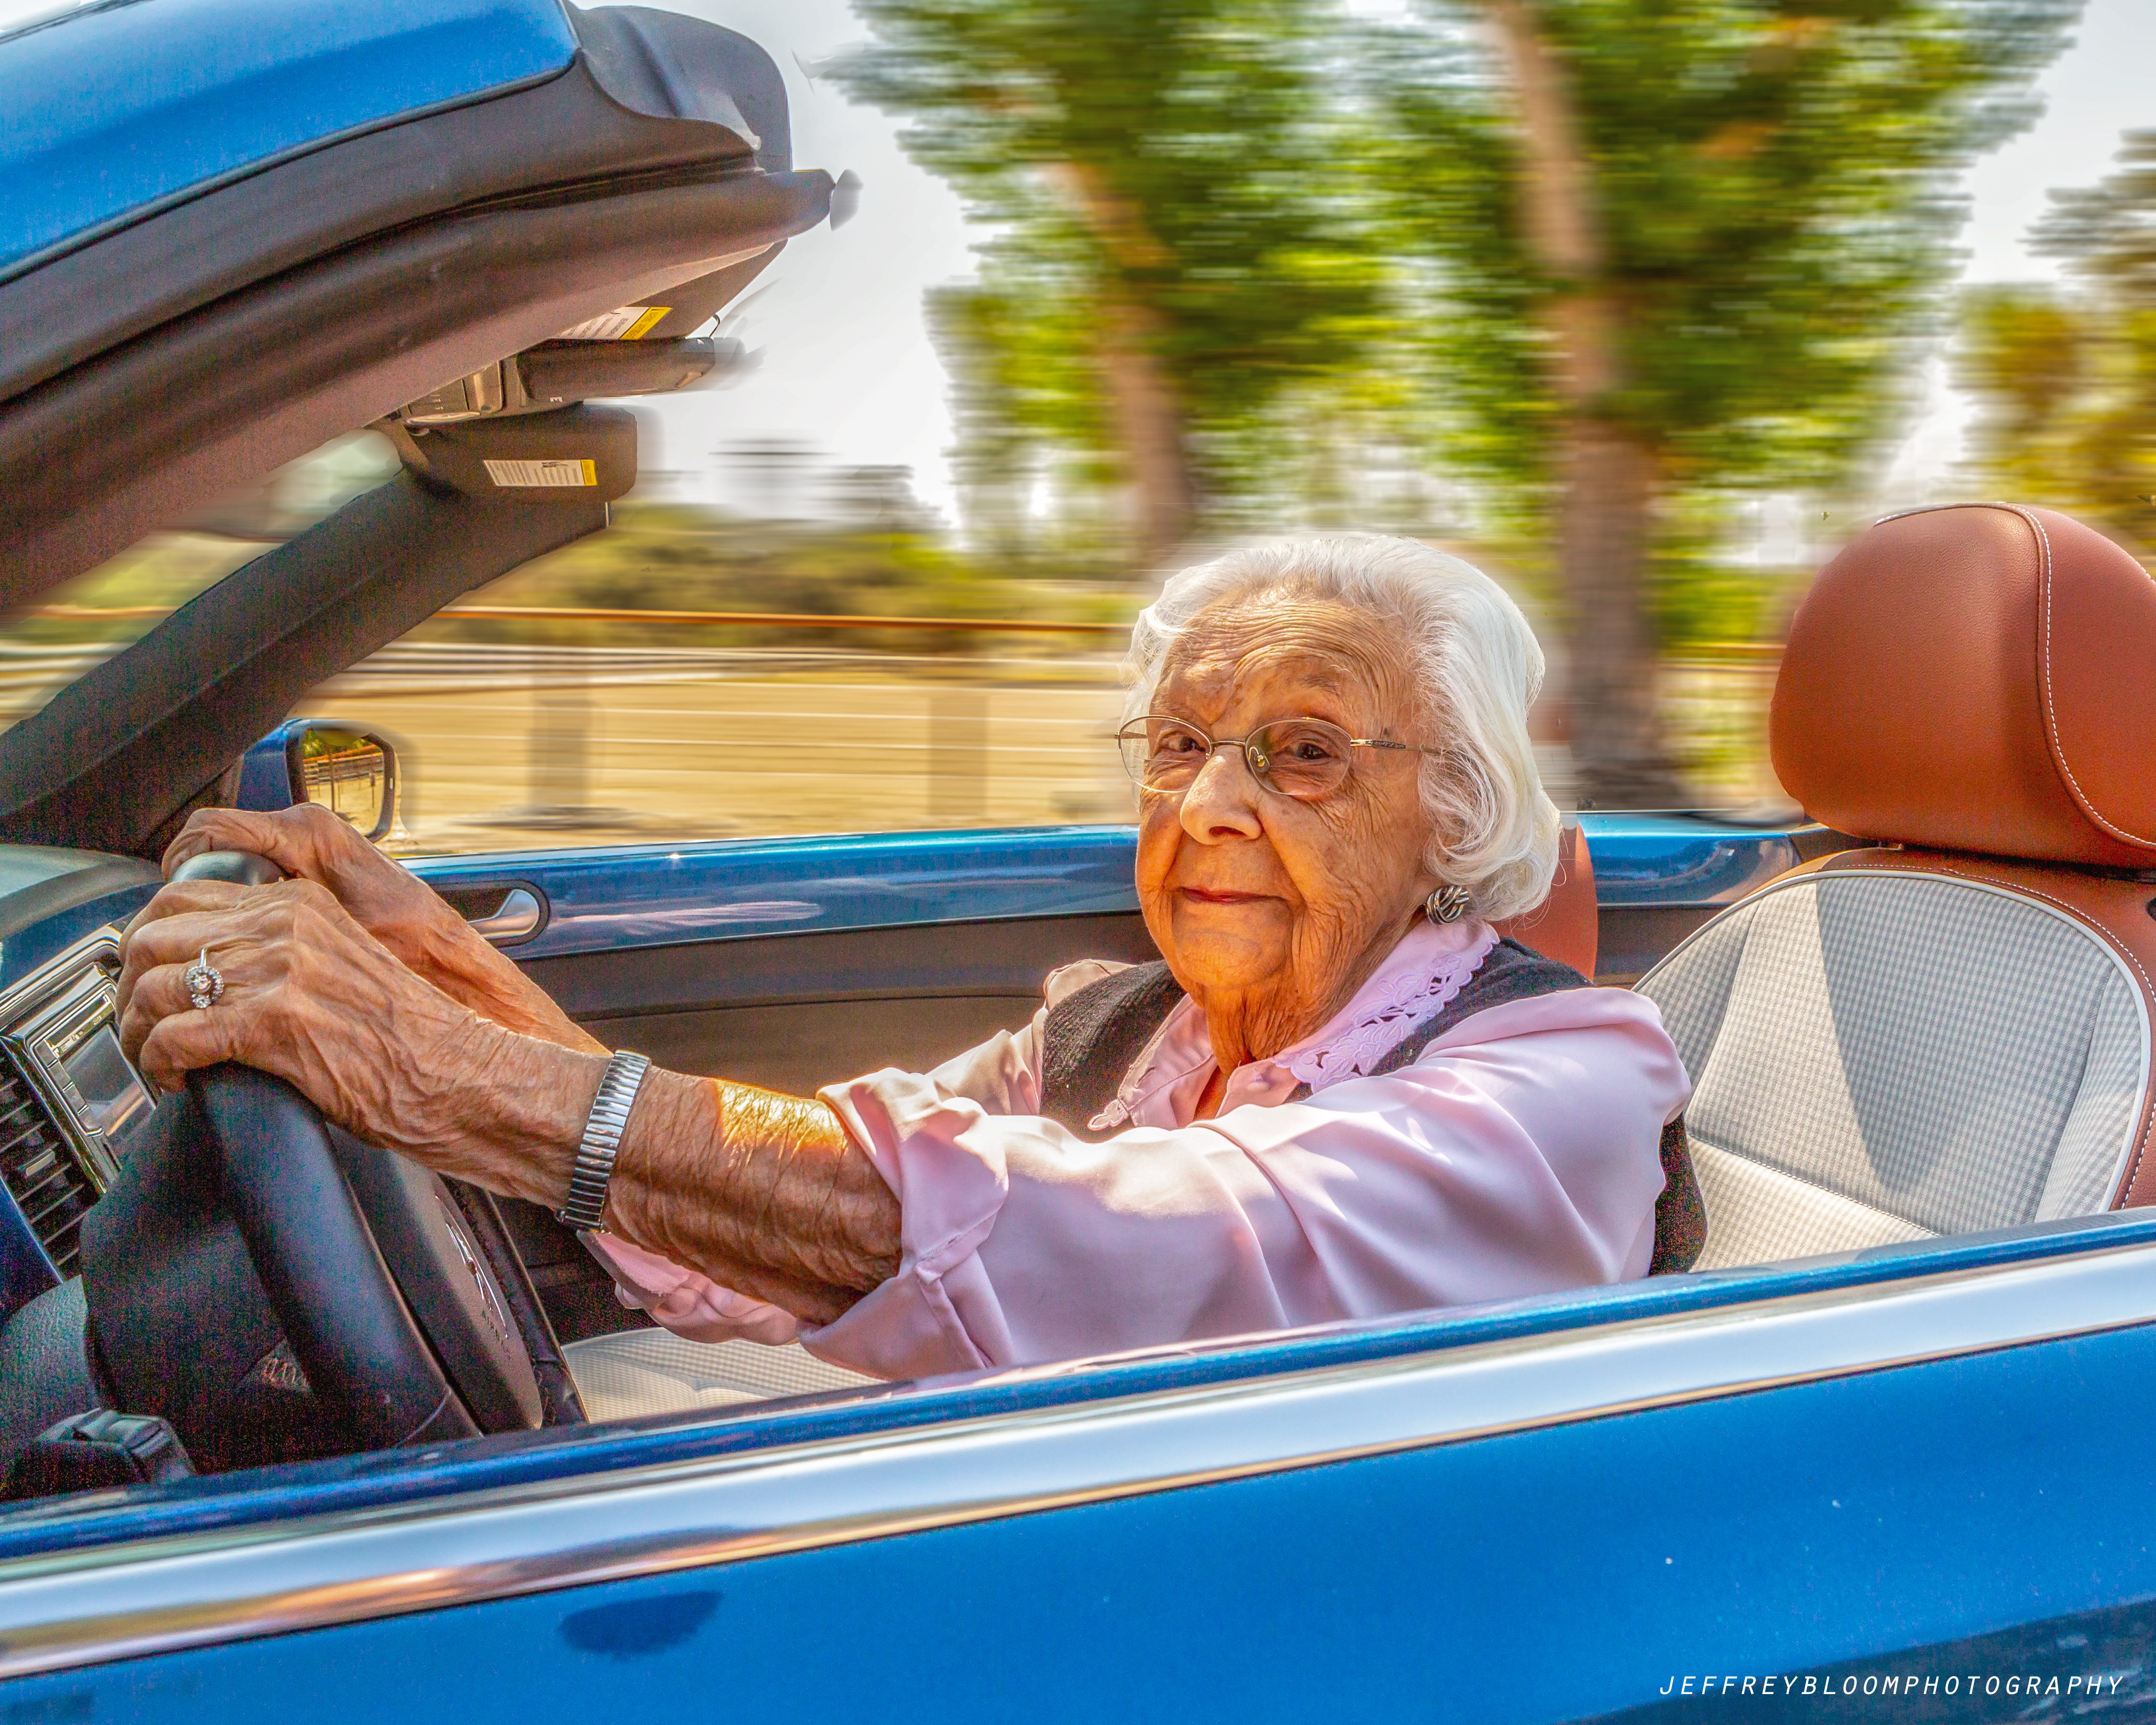 At 106 years old, grand marshal has lived a full life